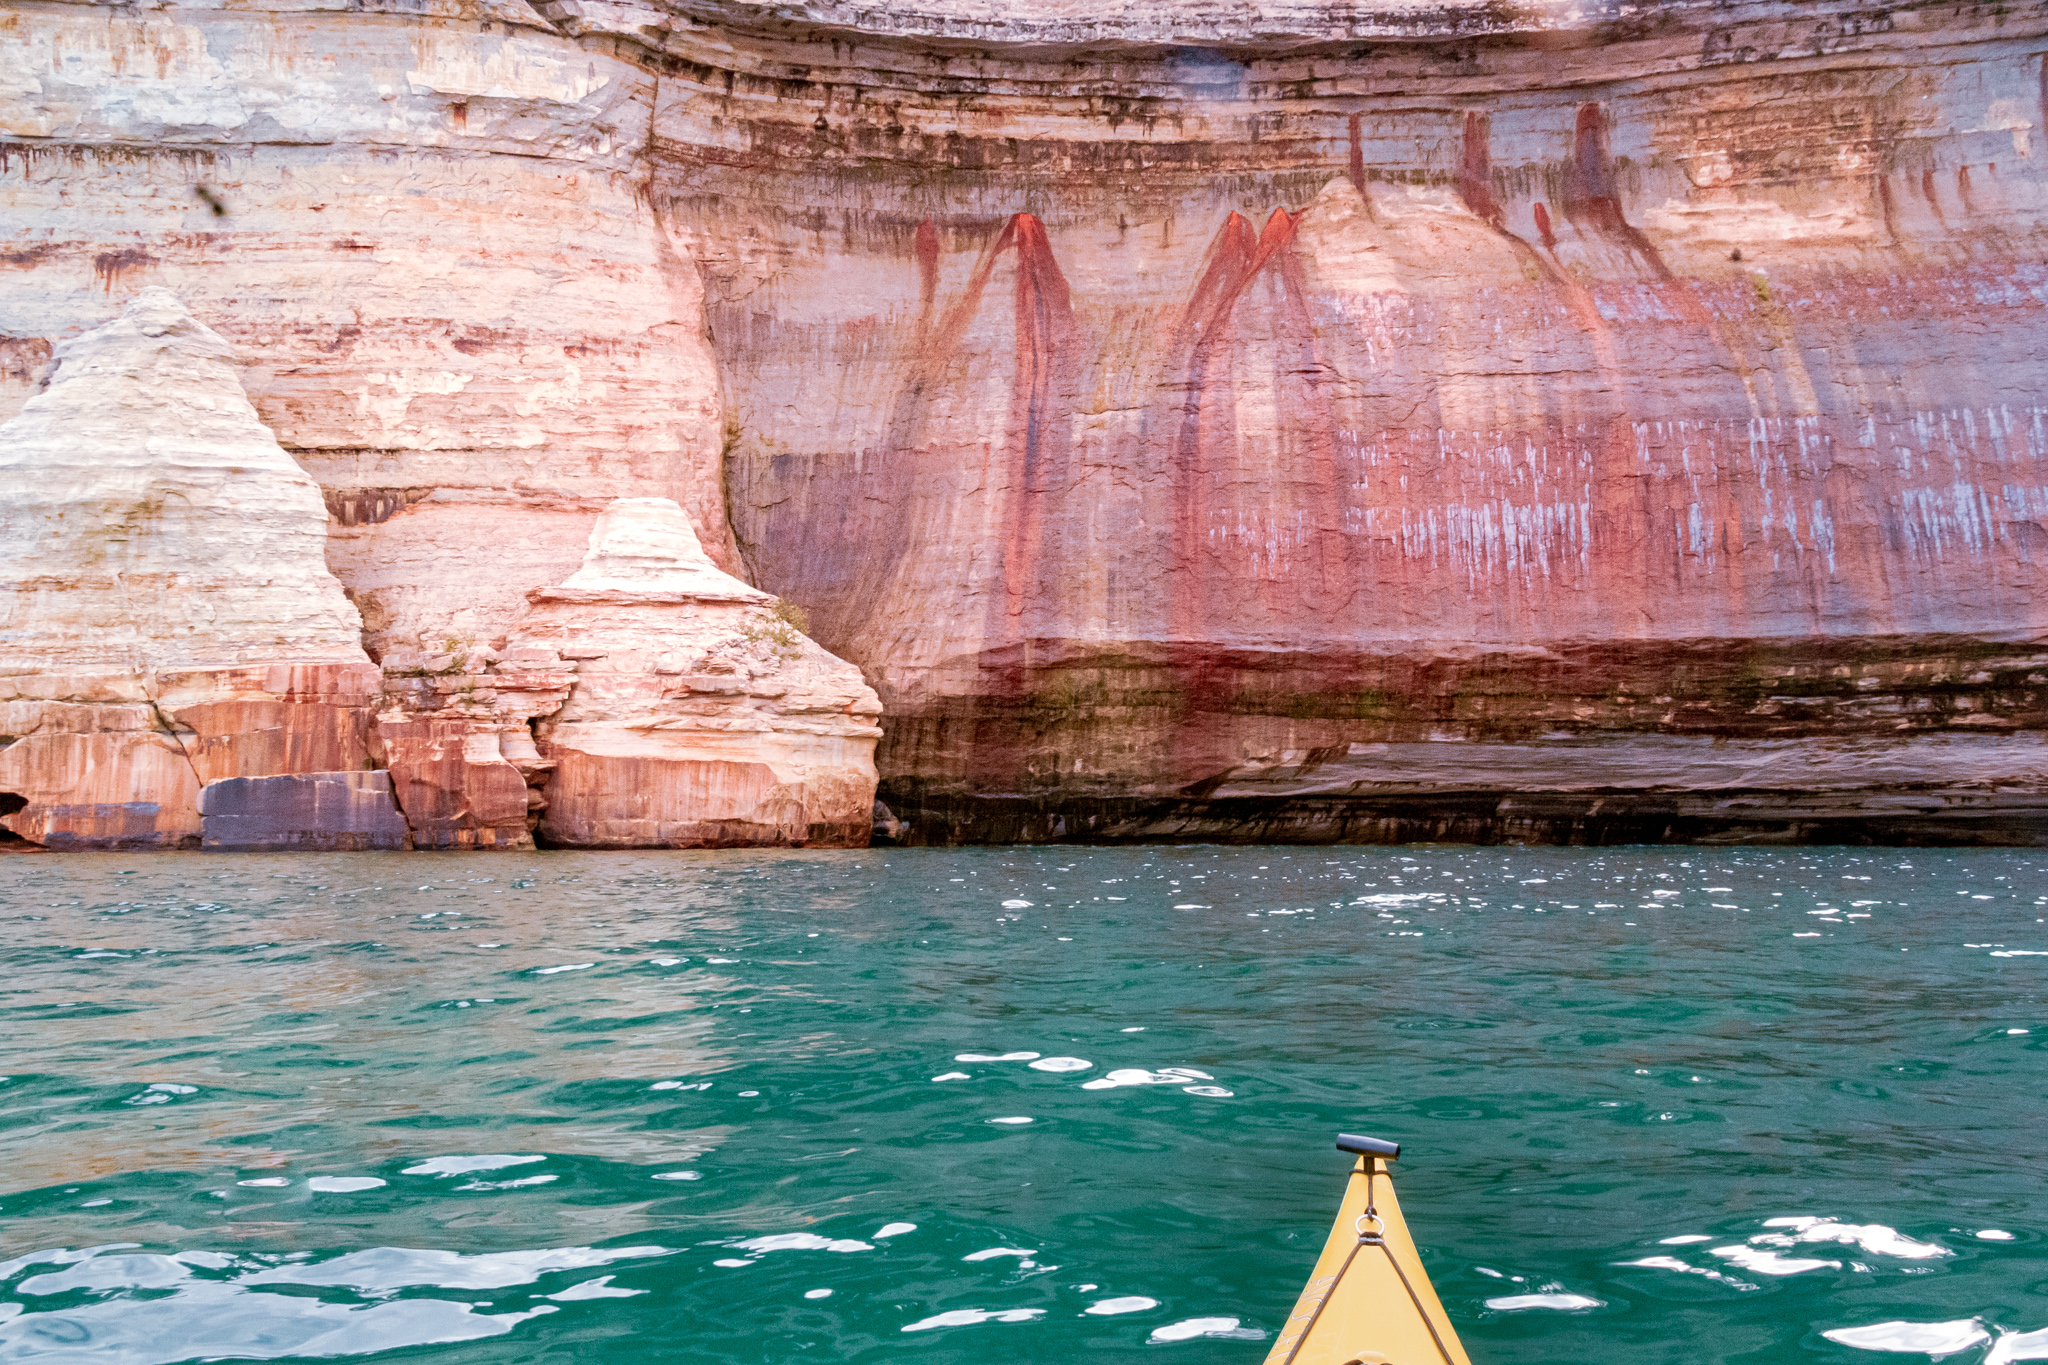 A yellow kayak on Lake Superior by the red and orange Pictured Rocks Cliffs